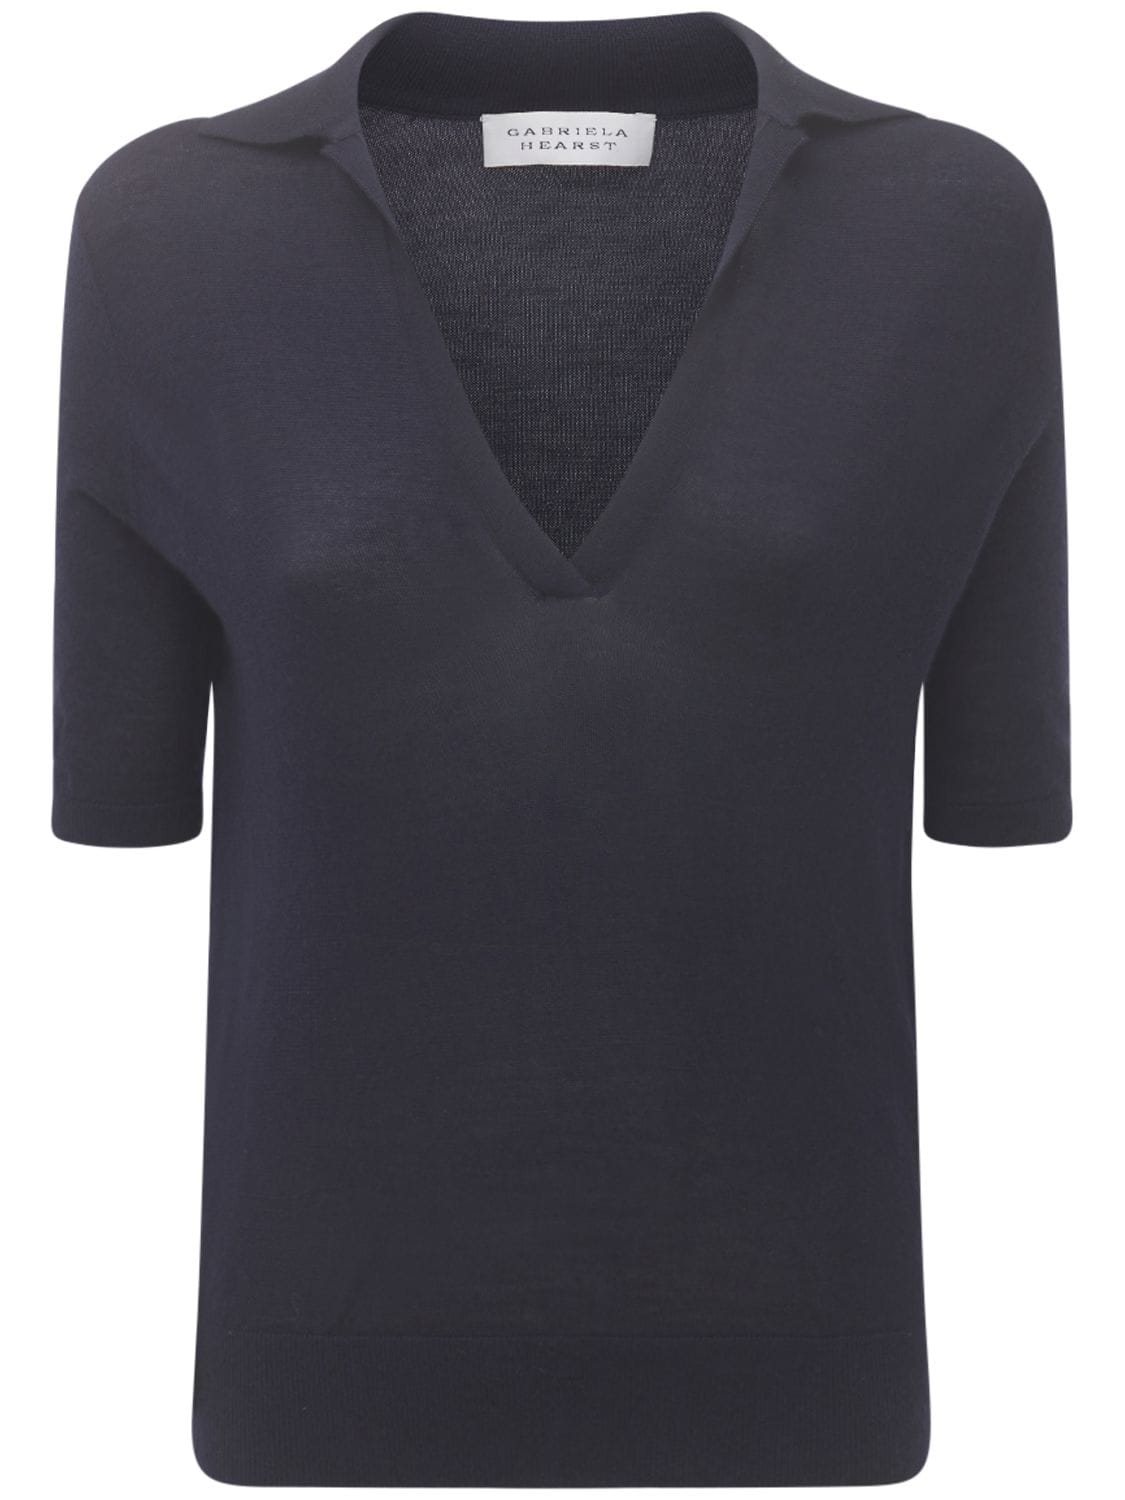 Lvr Sustainable Cashmere Blend Knit Top